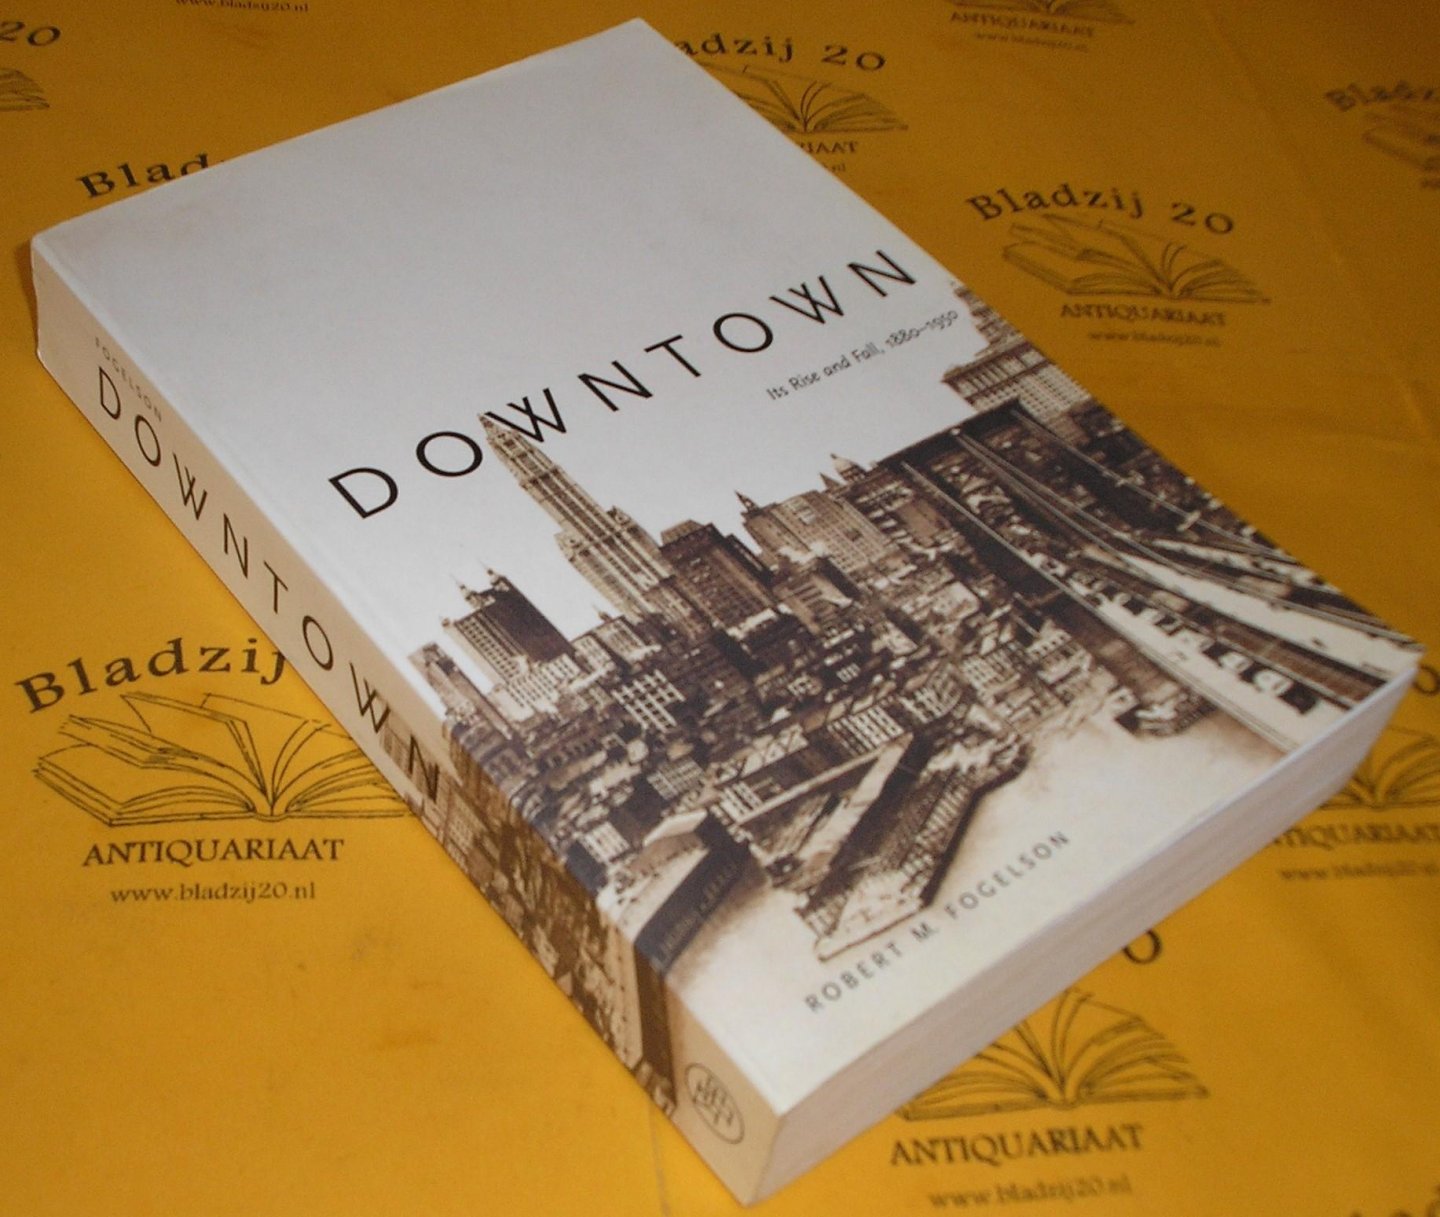 Fogelson, Robert M. - Downtown. It's rise and fall, 1880-1950.